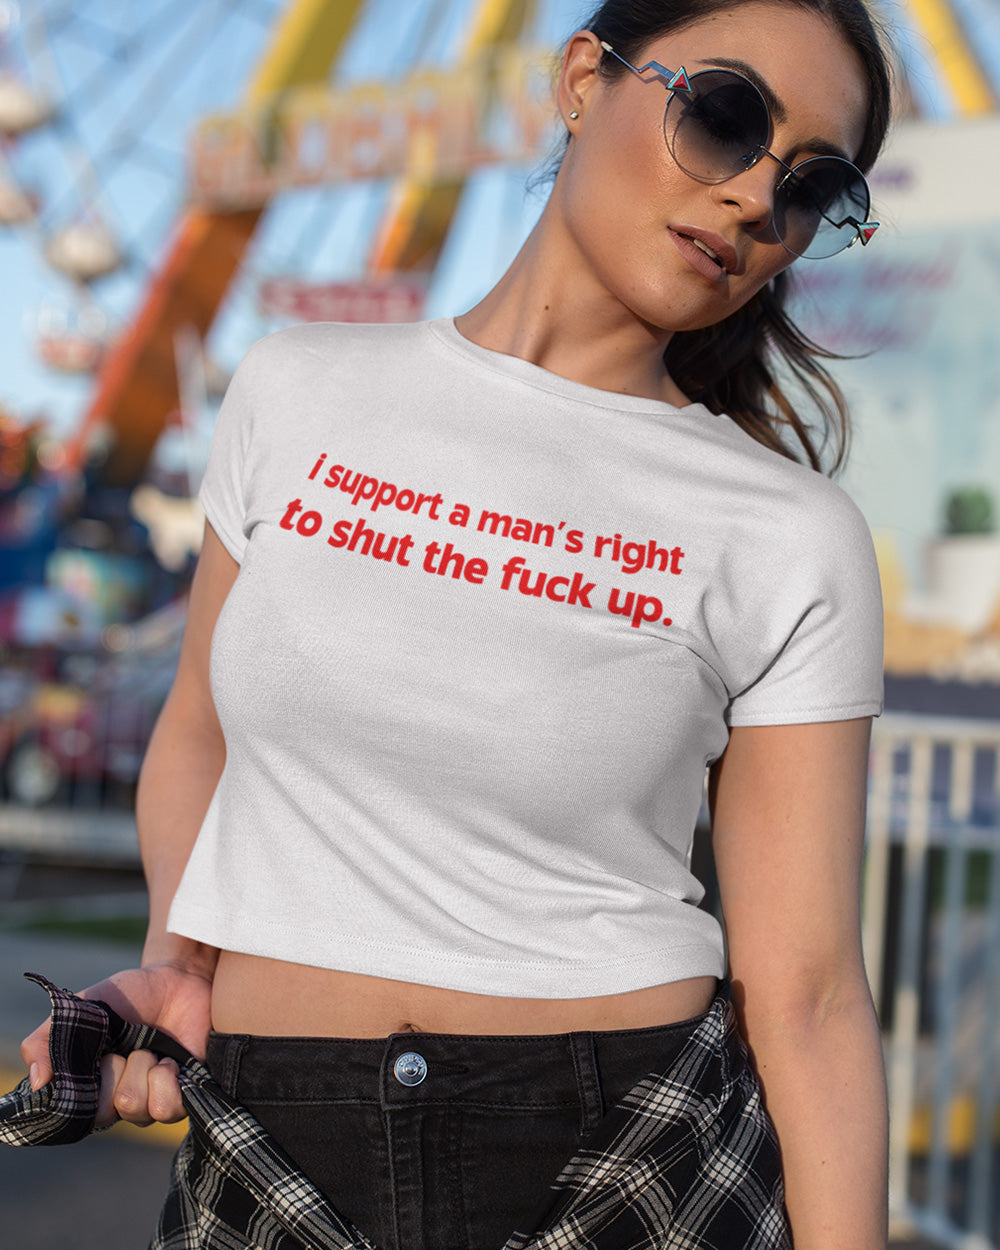 I Support a Man's Right To Shut The Fuck Up Baby Tees